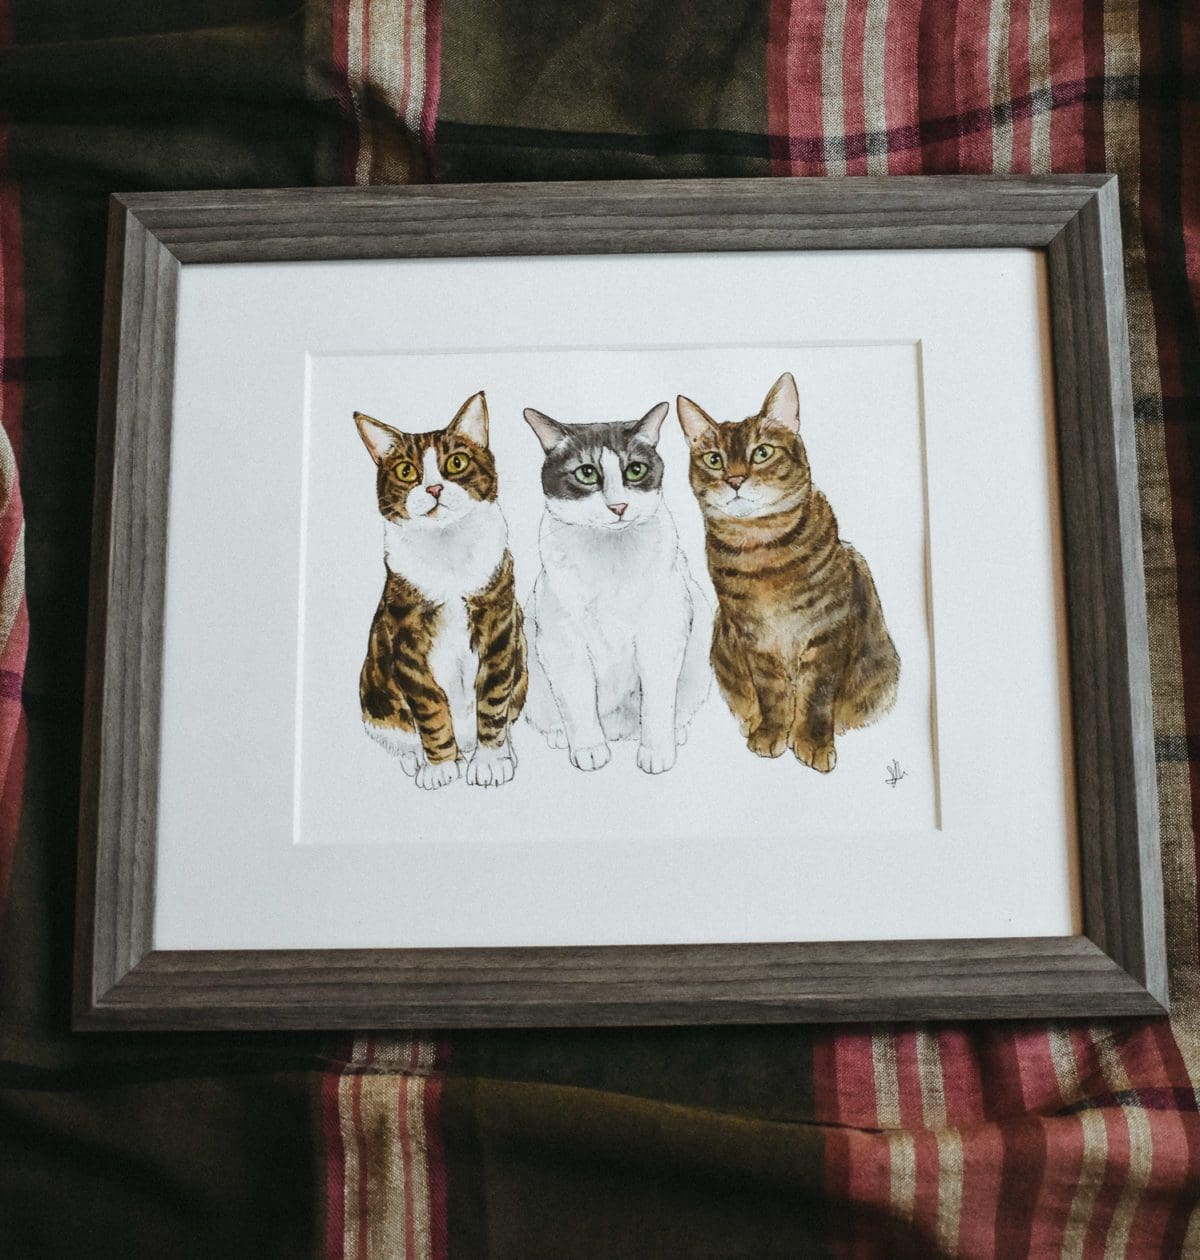 You Pet It. She Paints it. Sarah Miller of Sarah Paints Pets is an Atlanta-based pet portrait artist. We commissioned a three-cat portrait for our furbabies and the finished project was amazing. Read about the process and see the portrait here!